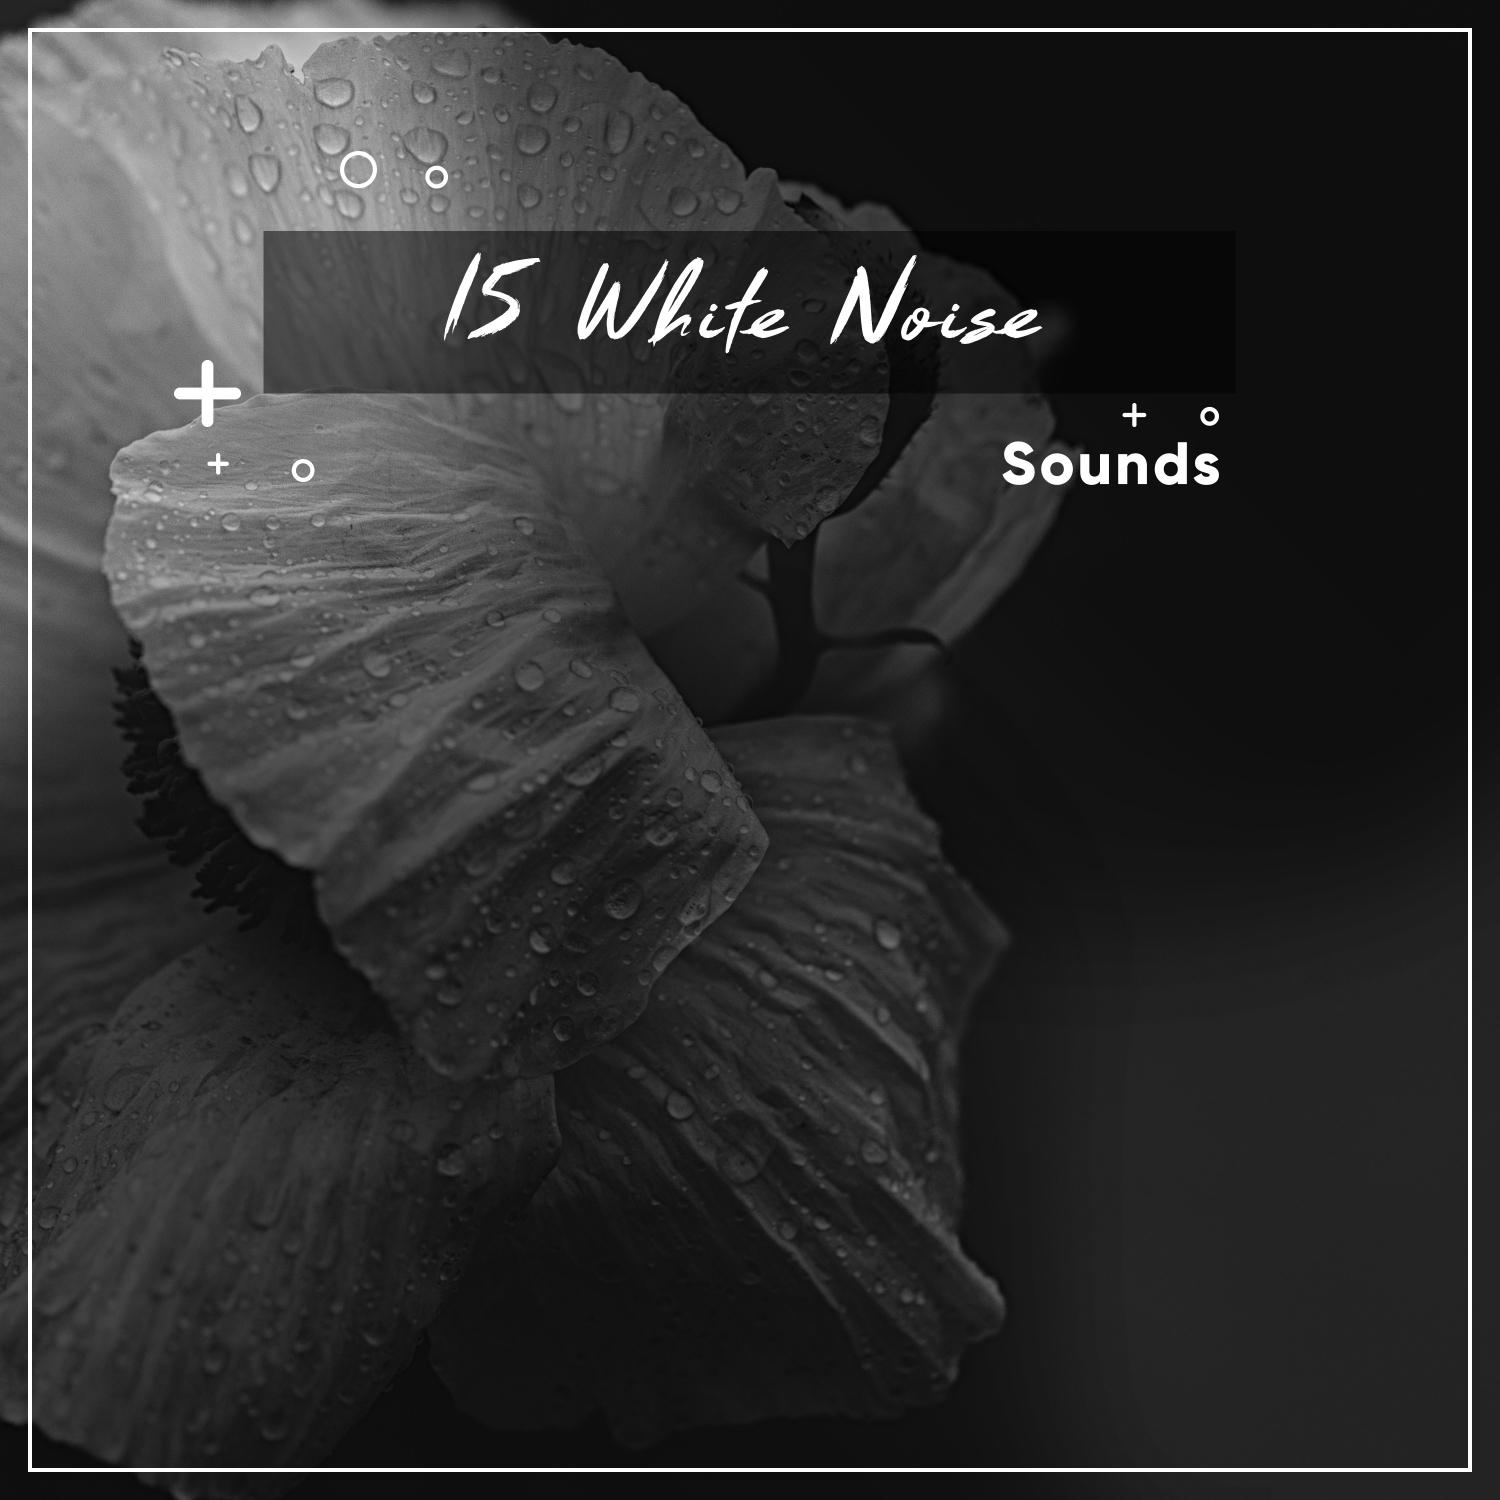 15 White Noise Sounds from Mother Nature